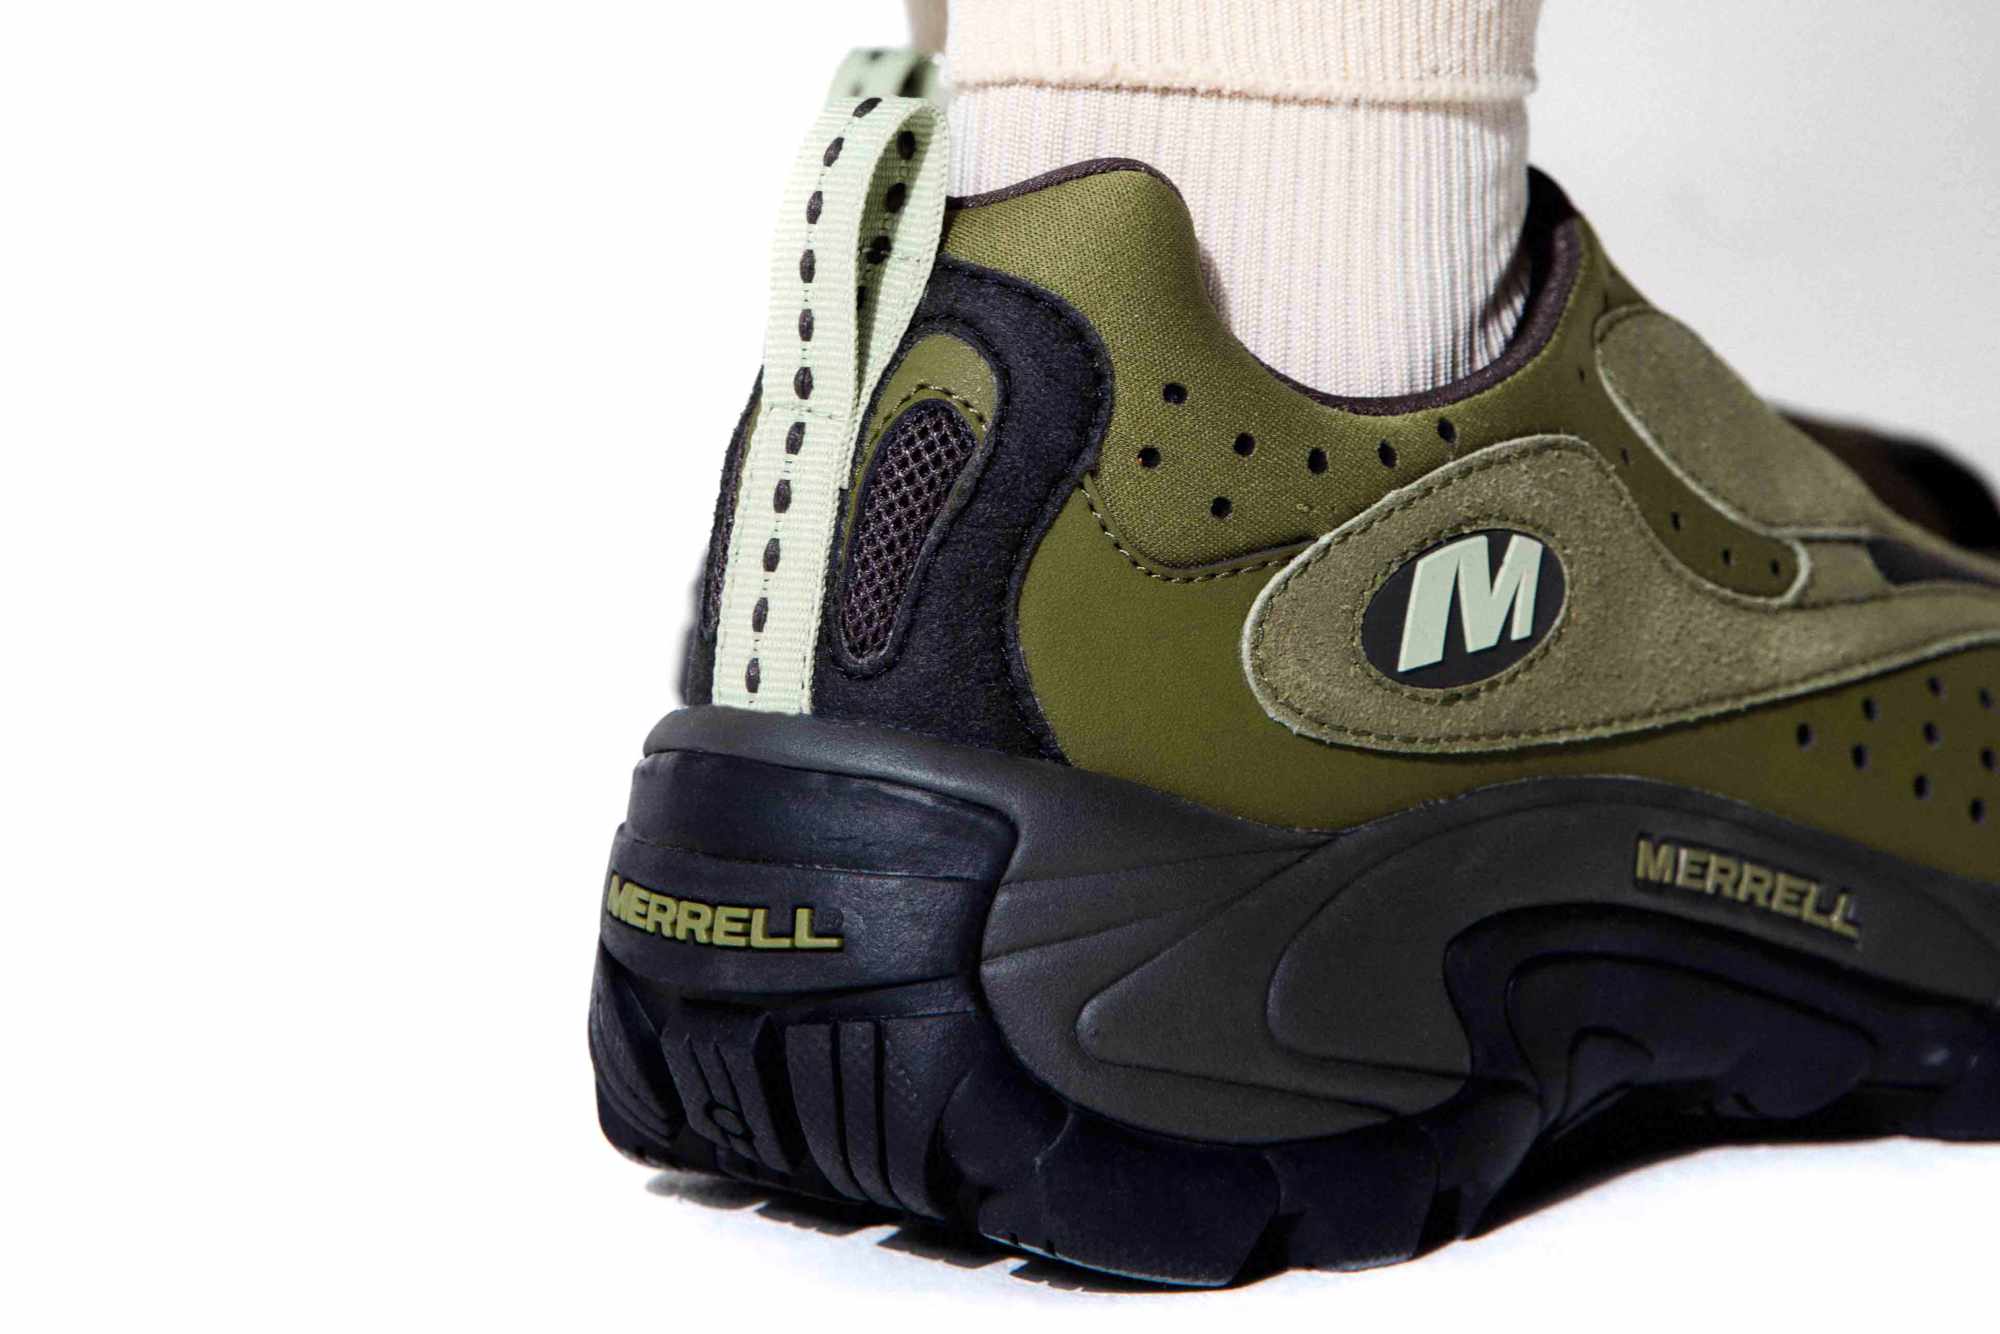 Merrell 1TRL SS24 sneaker collection